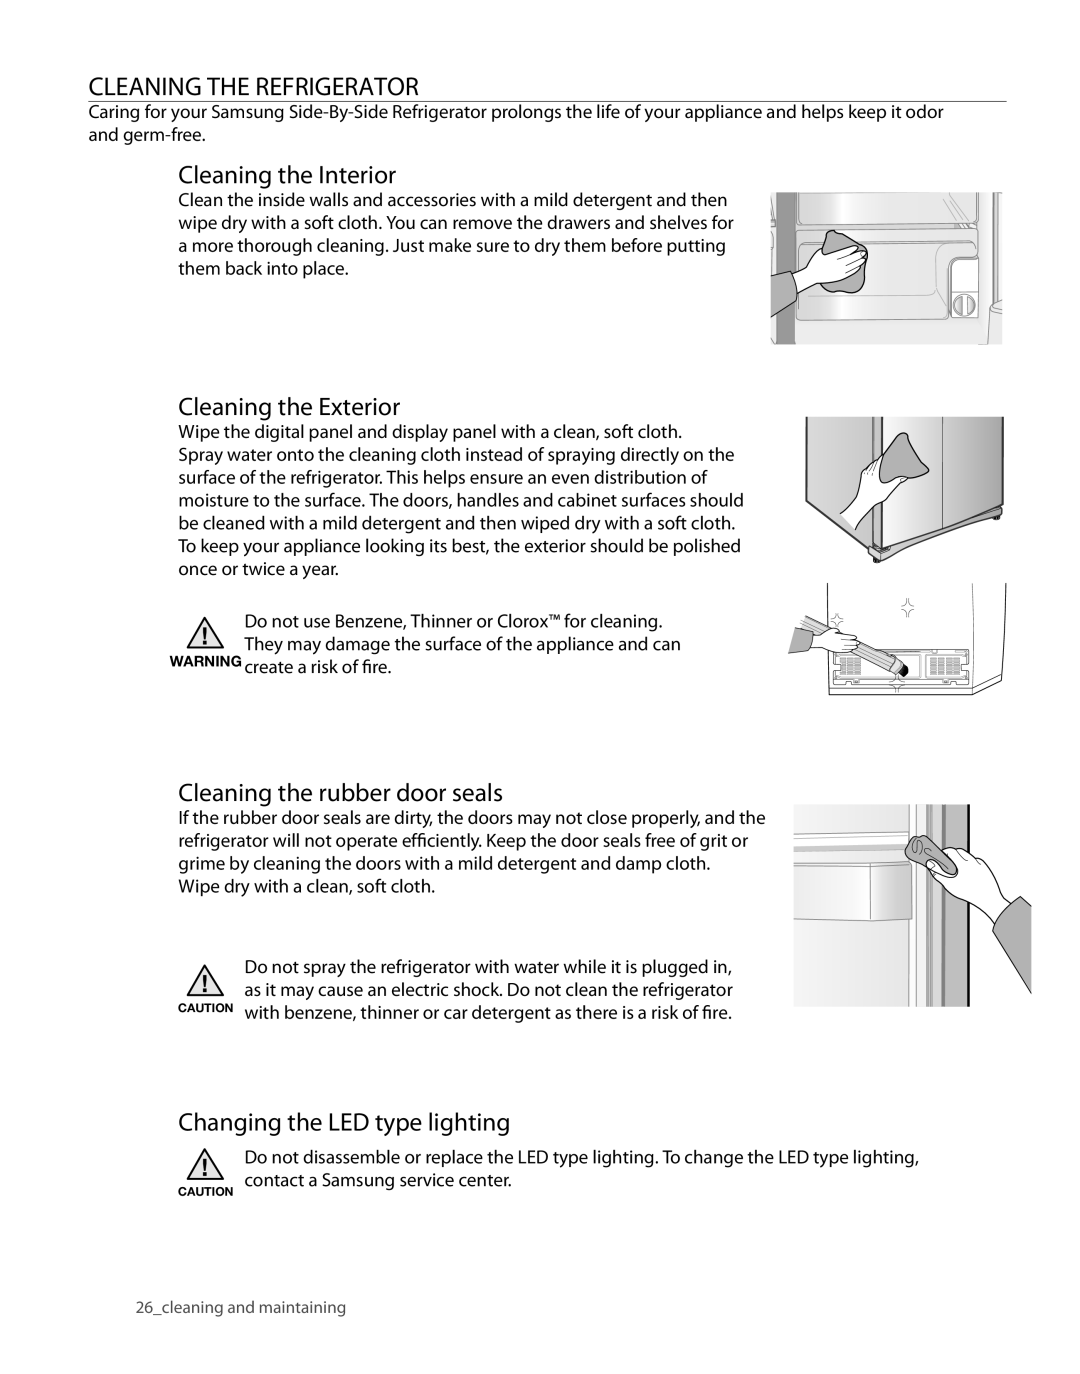 Samsung RS261MDWP Cleaning The Refrigerator, Cleaning the Interior, Cleaning the Exterior, Cleaning the rubber door seals 